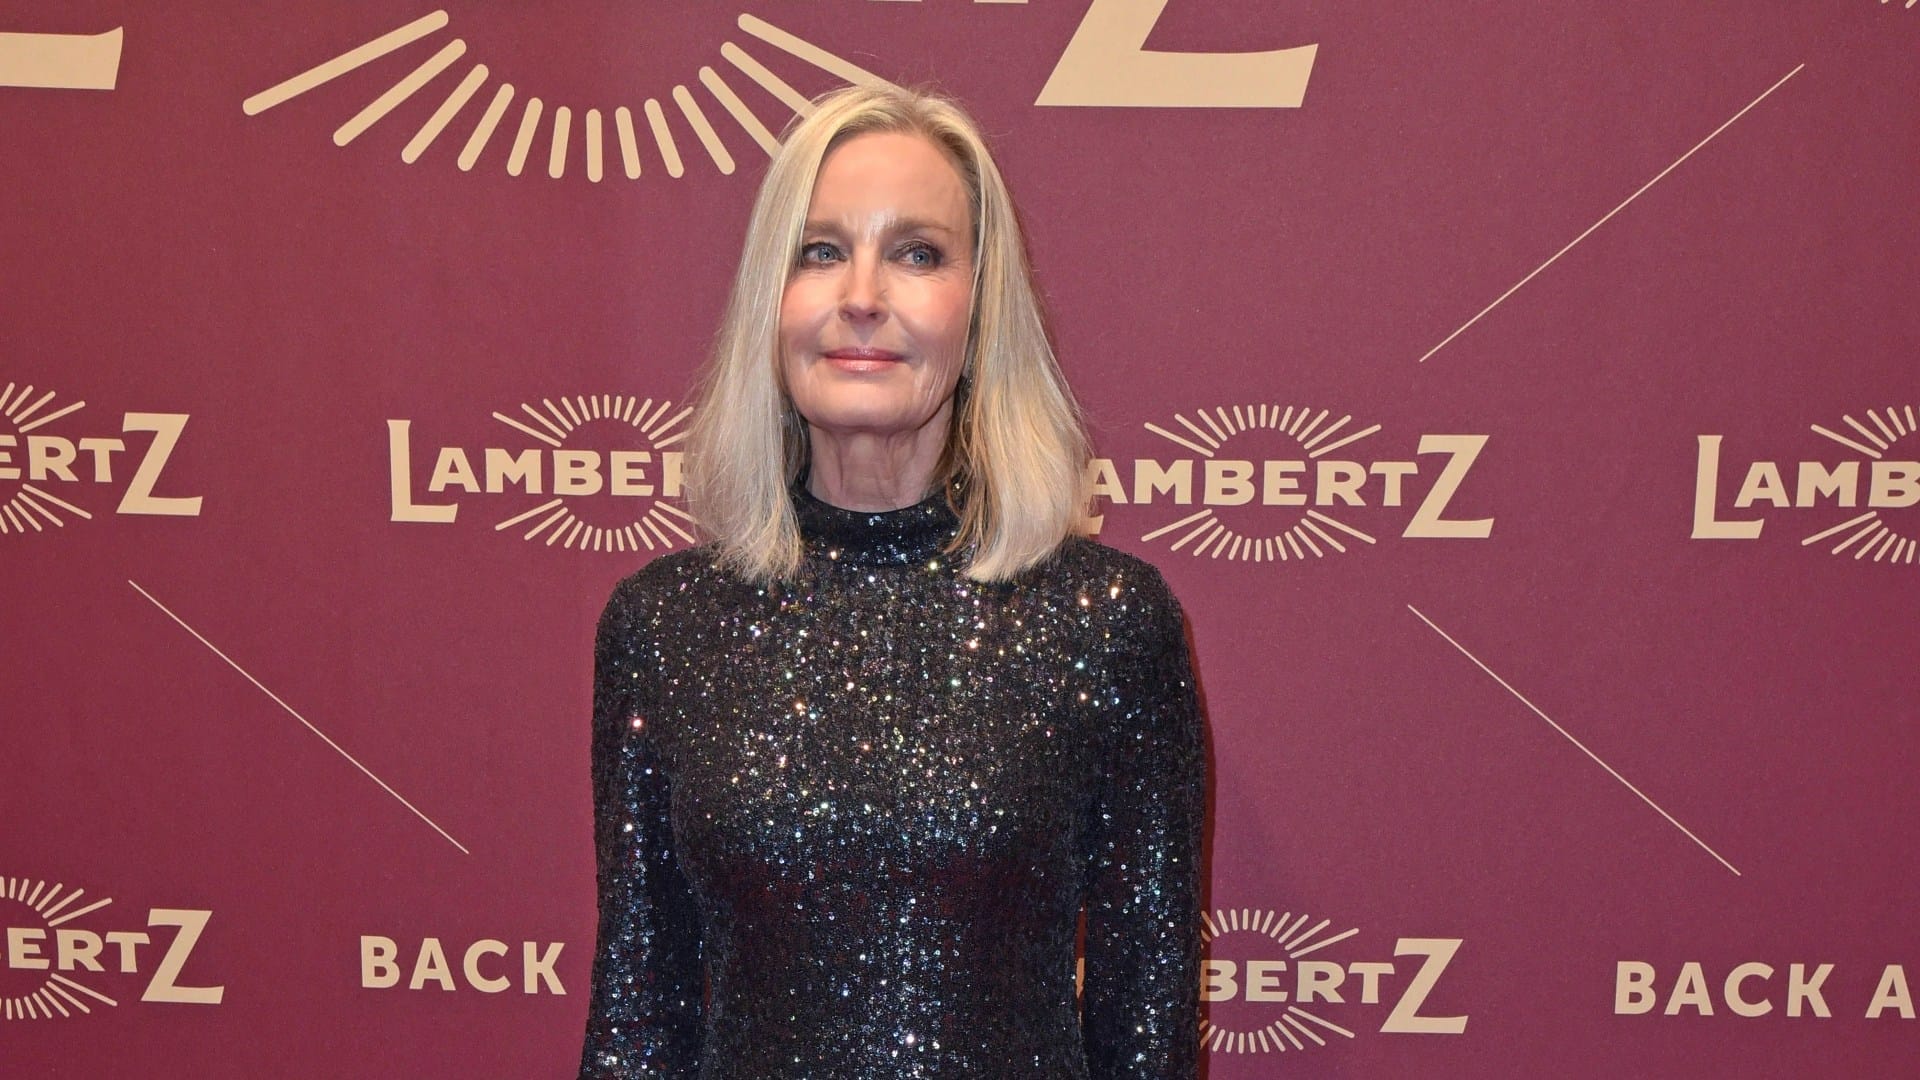 Legendary eighties sex symbol hasn't aged a day as she walks the red carpet 45 years after movie debut